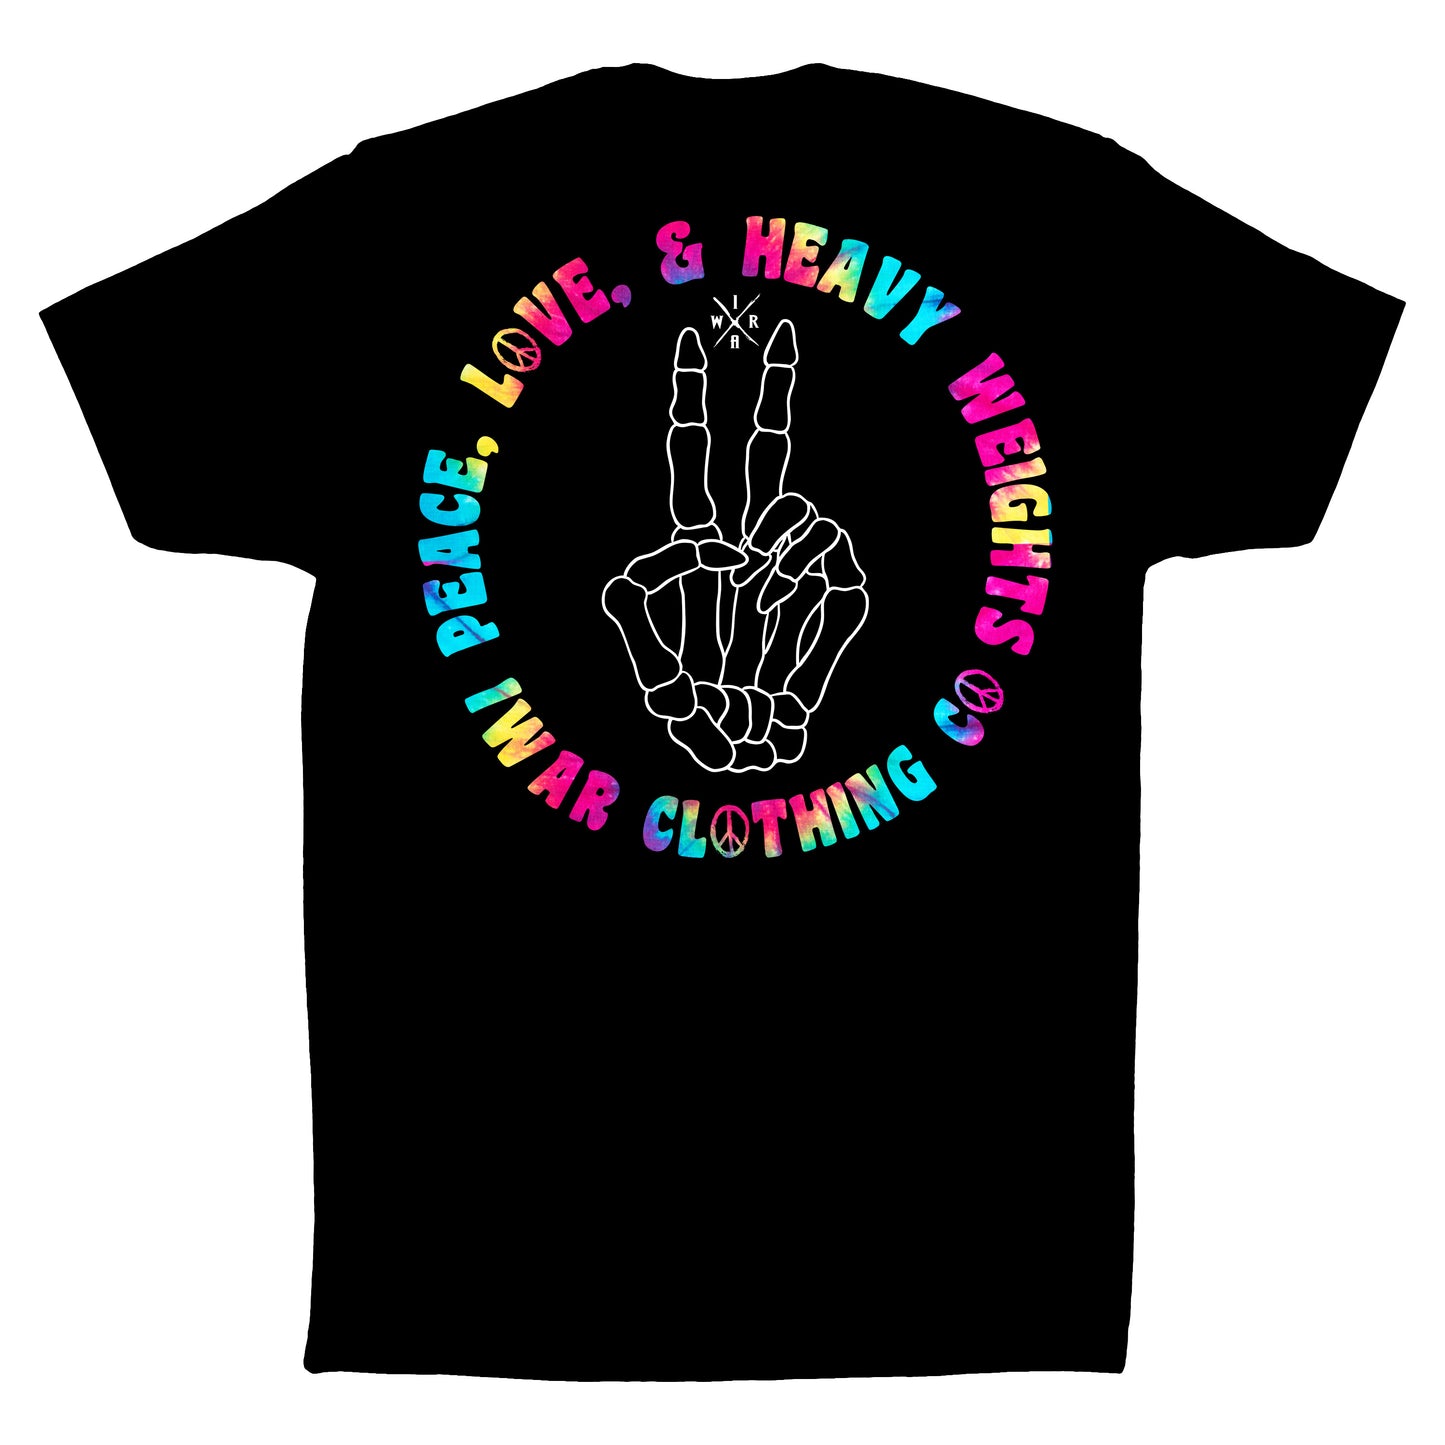 Peace, Love, and Heavy weights tee